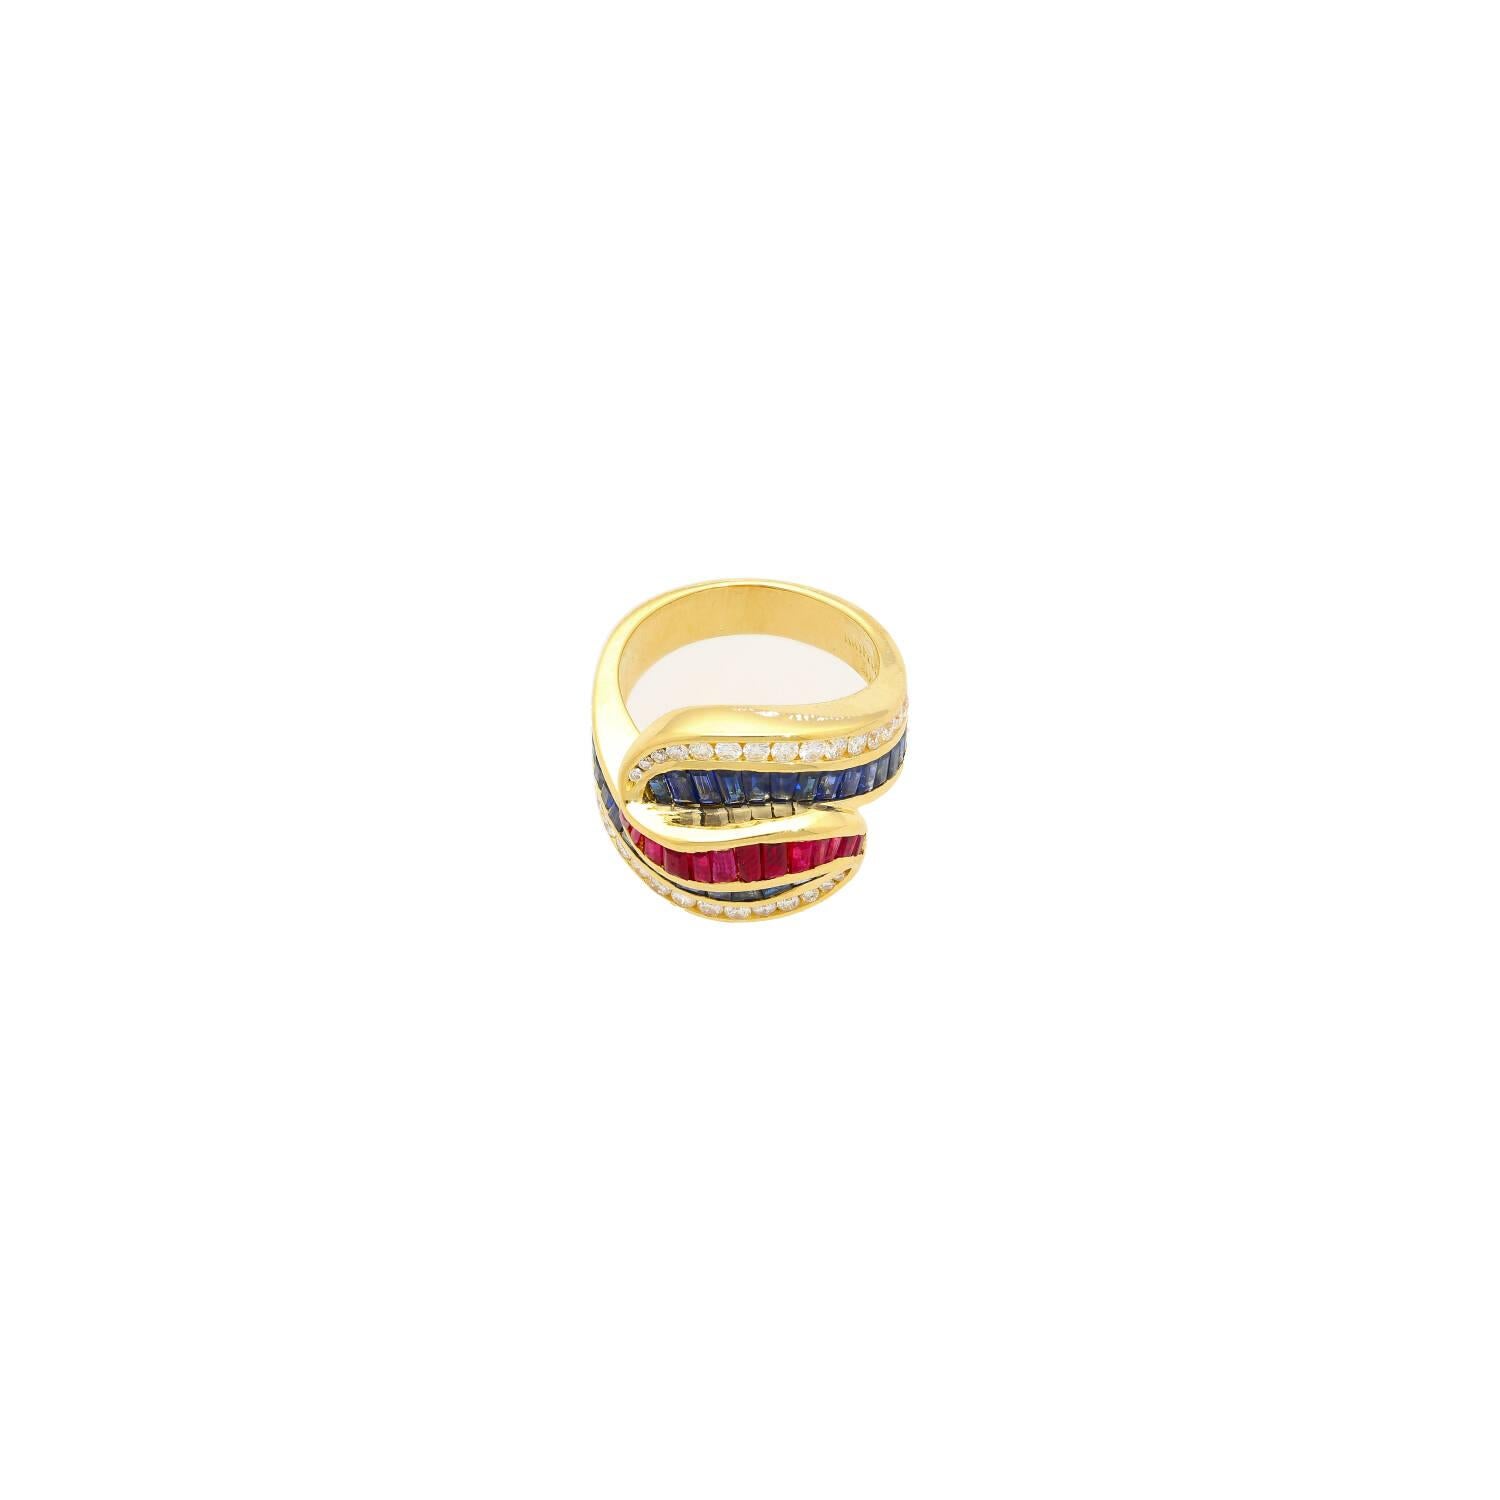 Vintage multi-gem ring, crafted in 18k yellow gold weighing 12.97 grams. Totaling carat weight is 3.00 CTTW, and is a clustered blend of fourteen red baguette-cut rubies and 28 blue sapphires, further adorned by thirty round-cut diamonds. Each stone